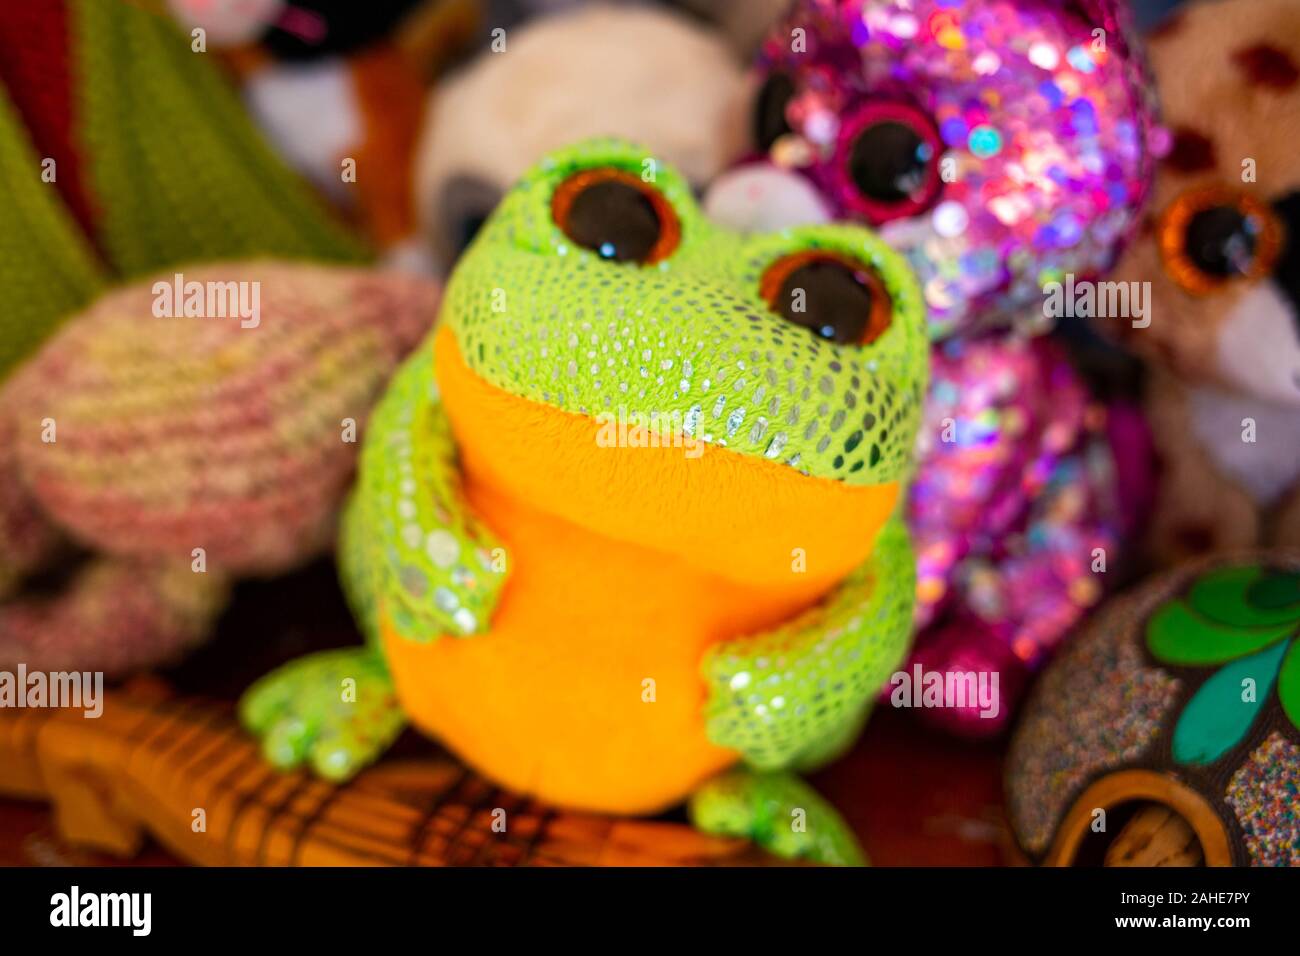 Stuffed frog toy Cut Out Stock Images & Pictures - Alamy